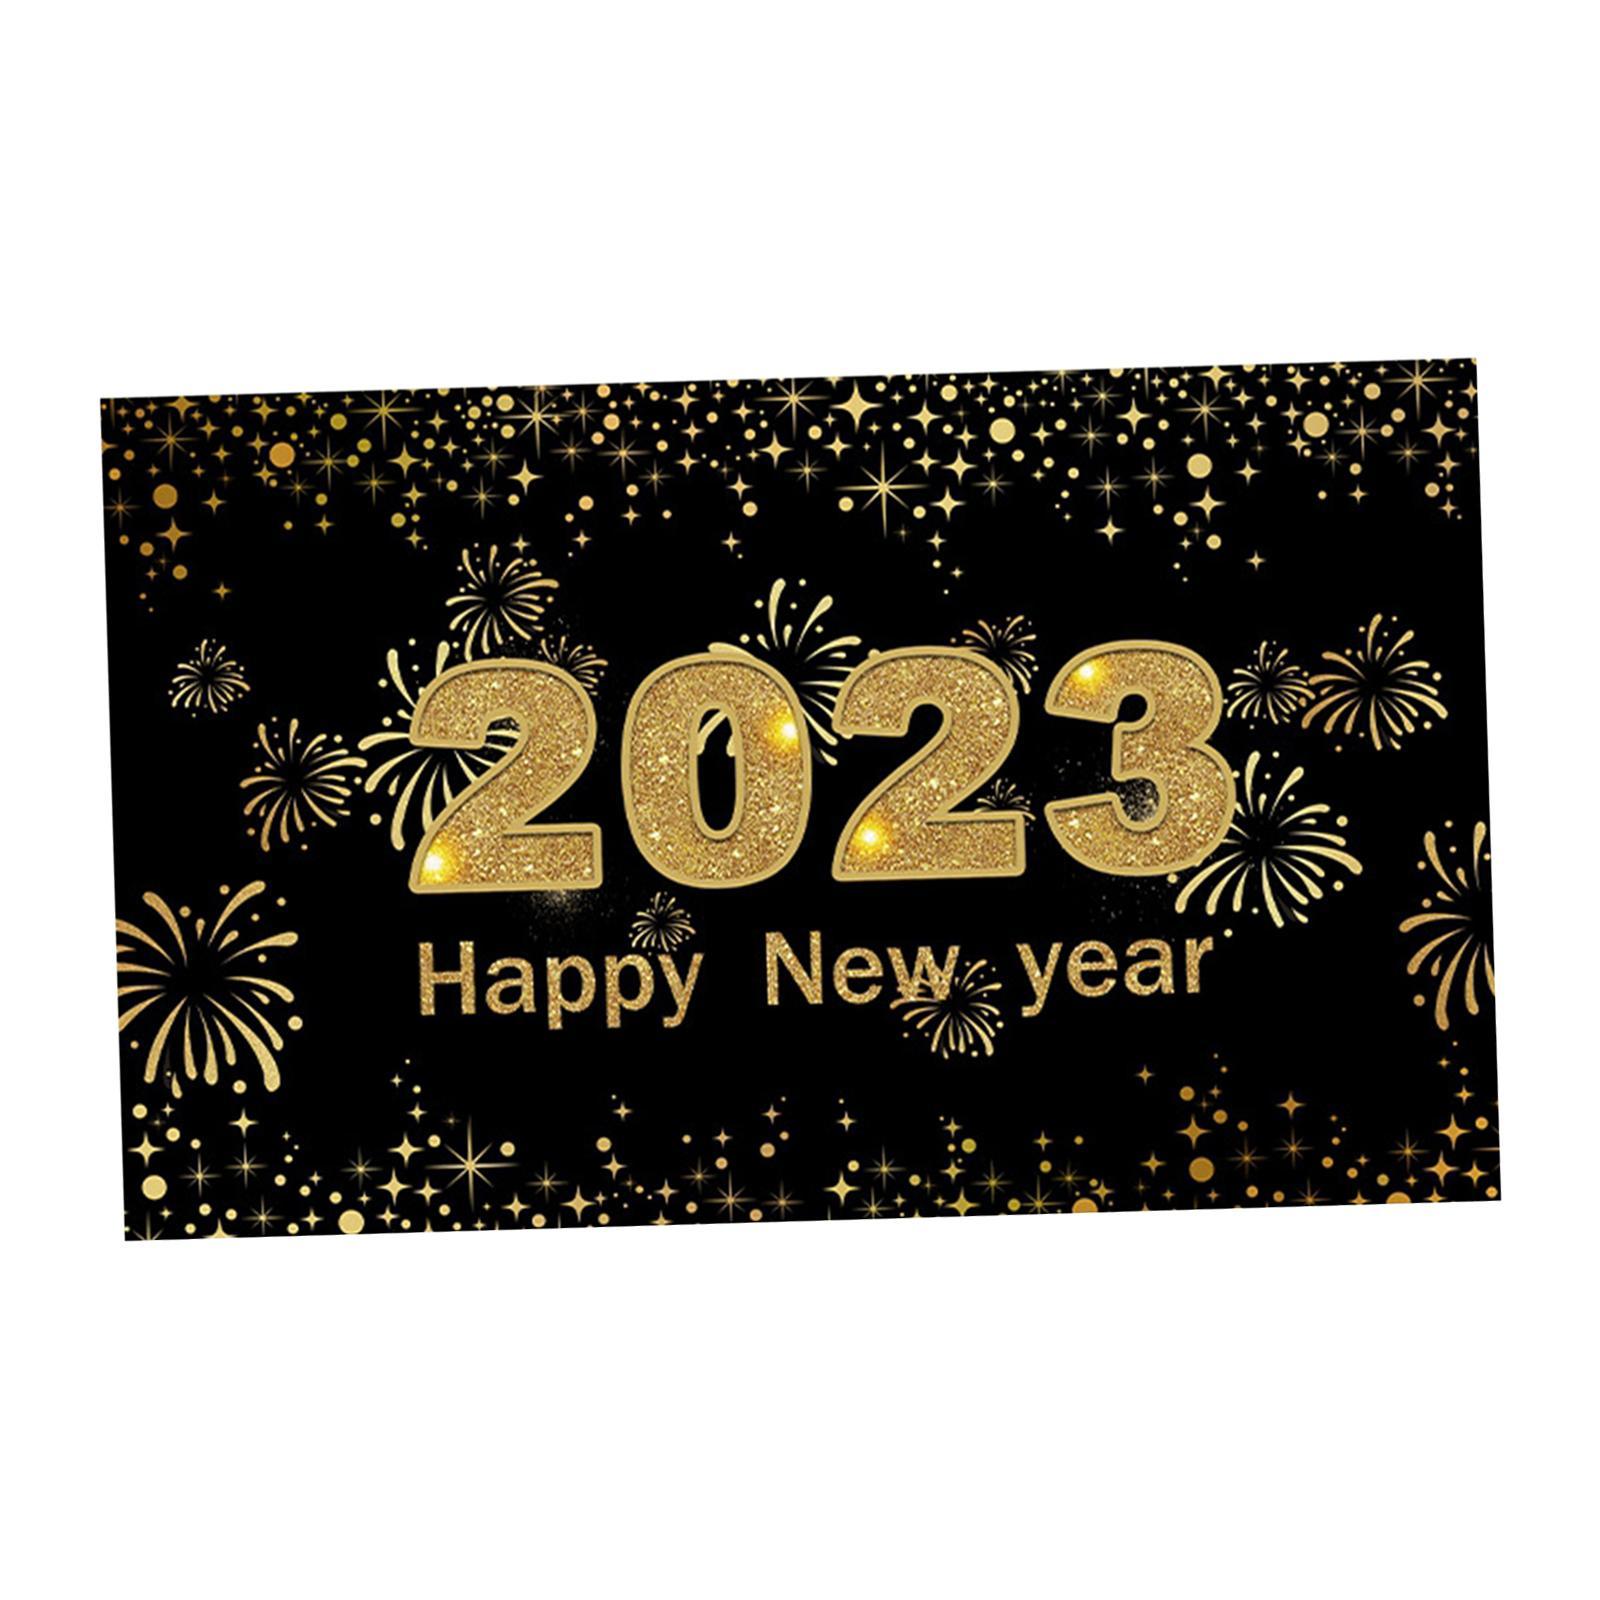 Happy New Year  2023 Backdrop Black Aureate Decorative Photography Lawn  Poster for Christmas Living Room Kitchen Yard Garden